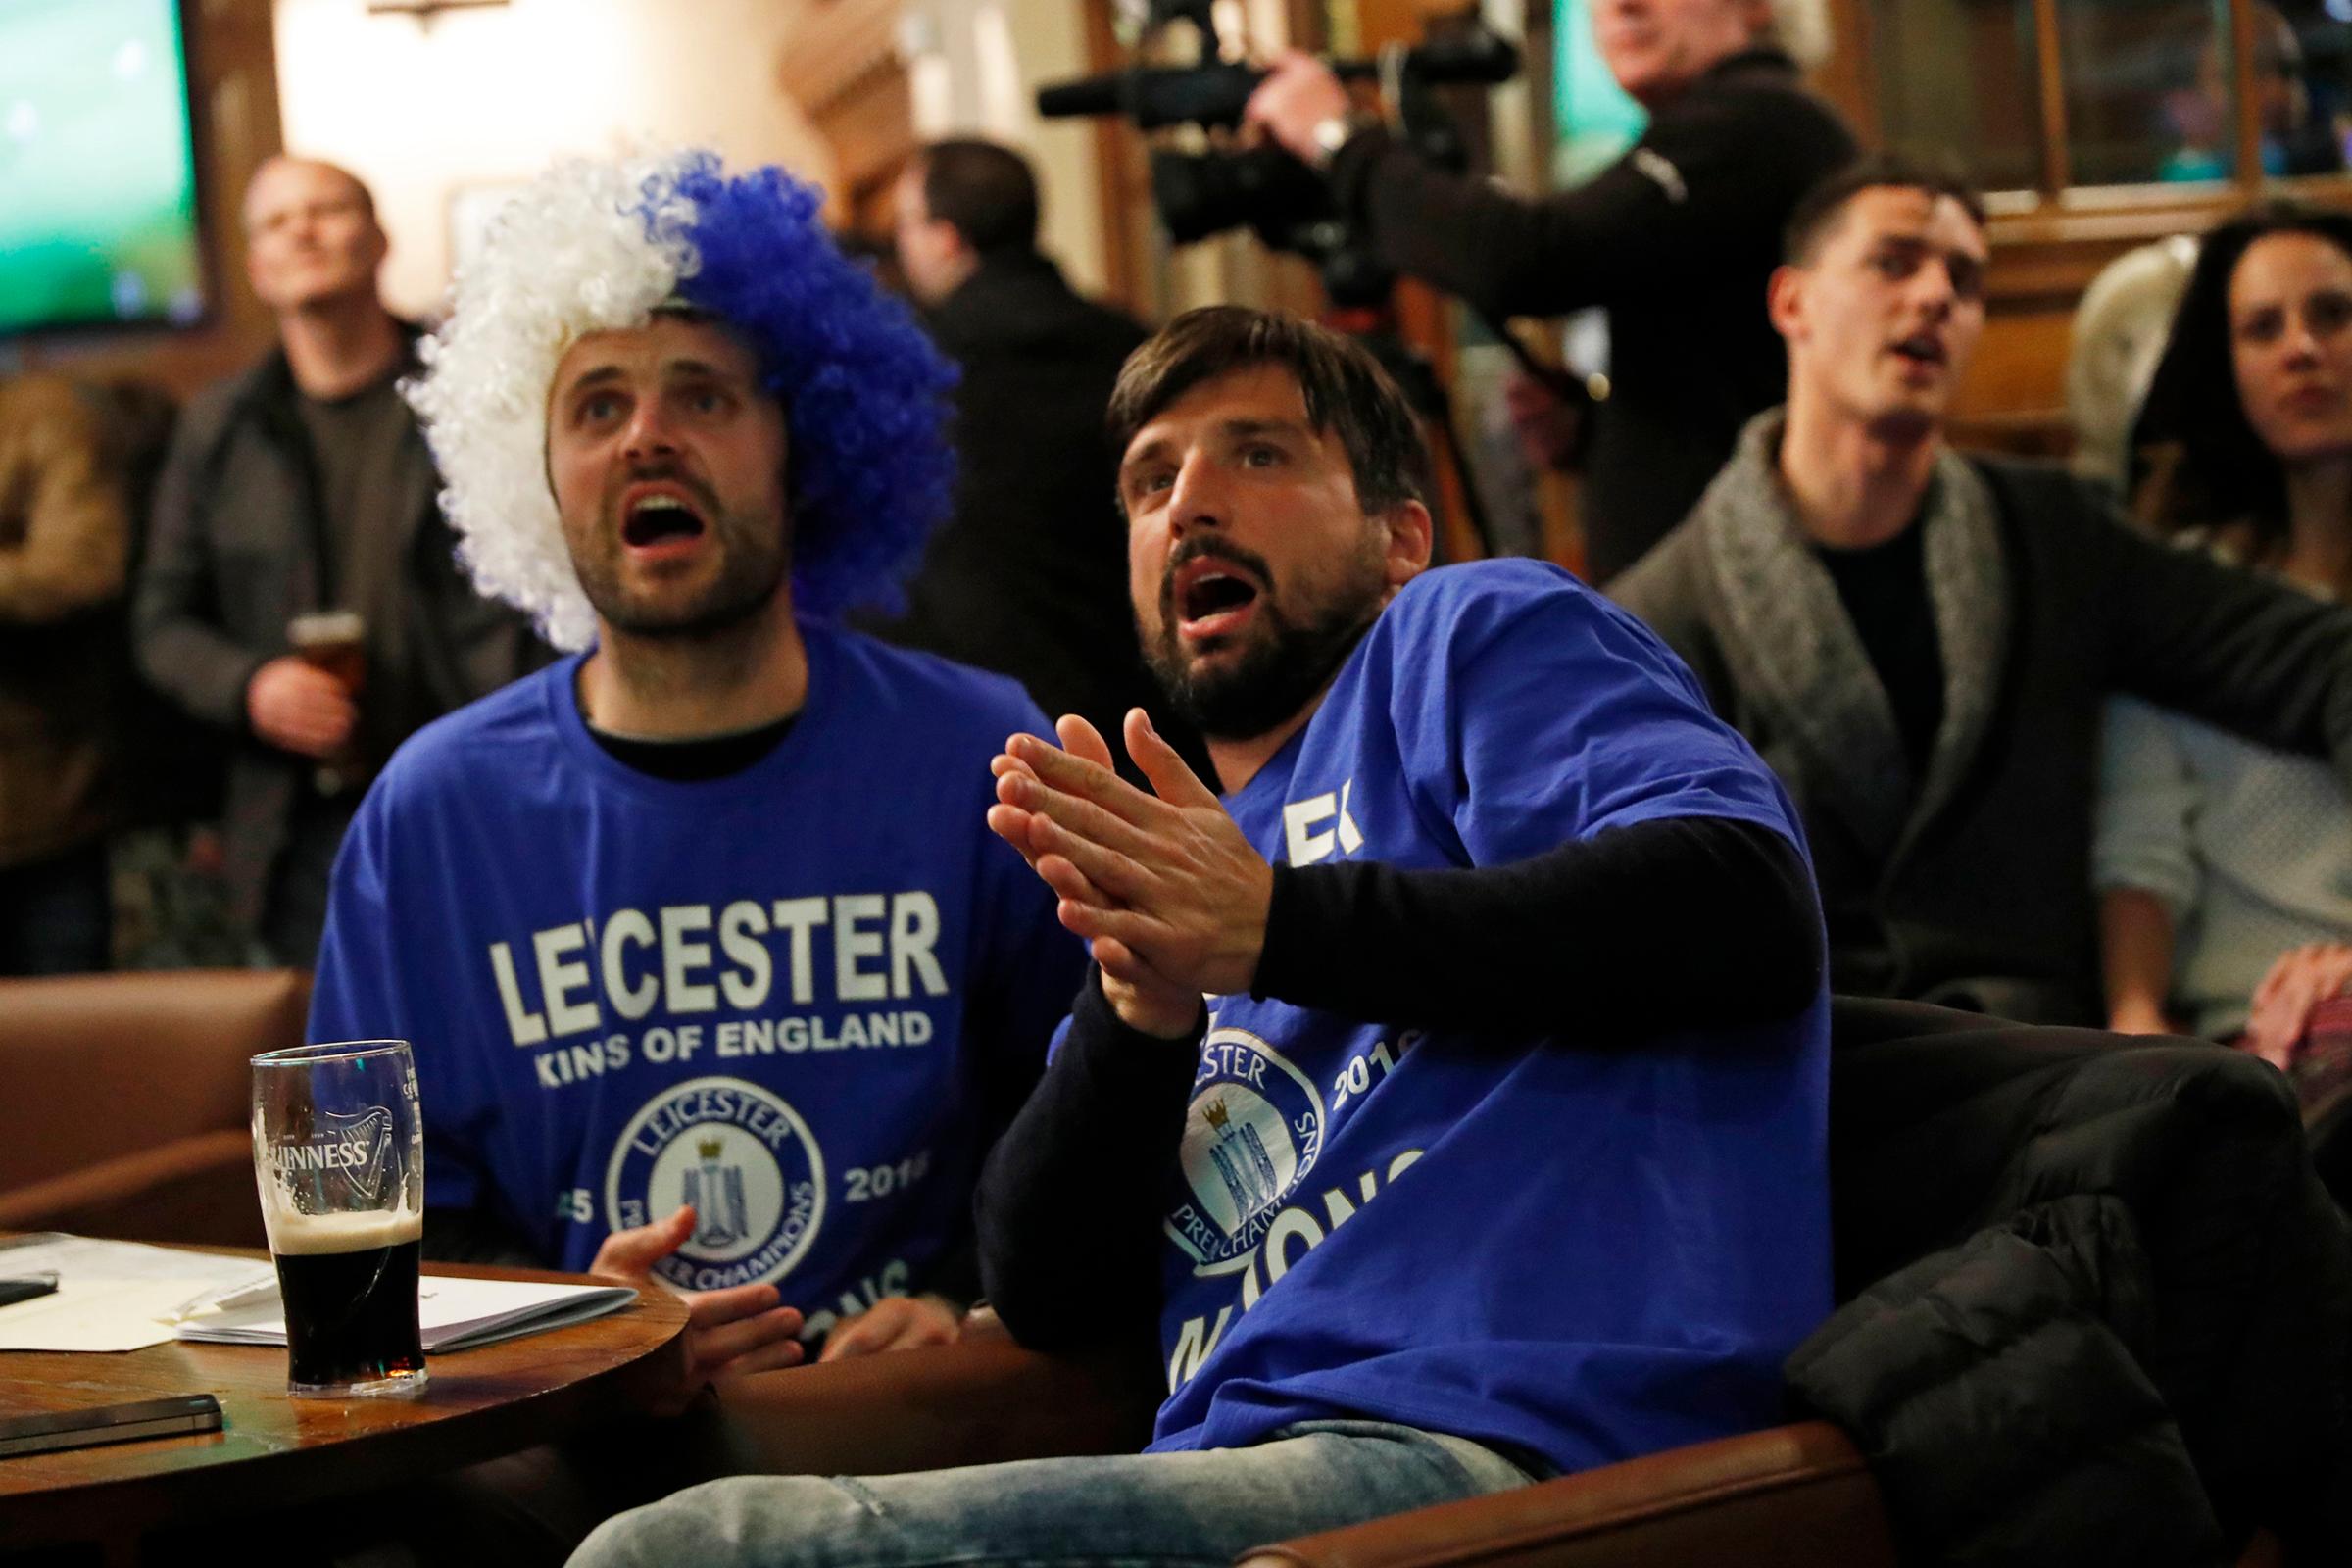 Leicester City fans watch the English Premier League match between Chelsea and Tottenham Hotspur at a pub in Leicester, eastern England, May 2, 2016.